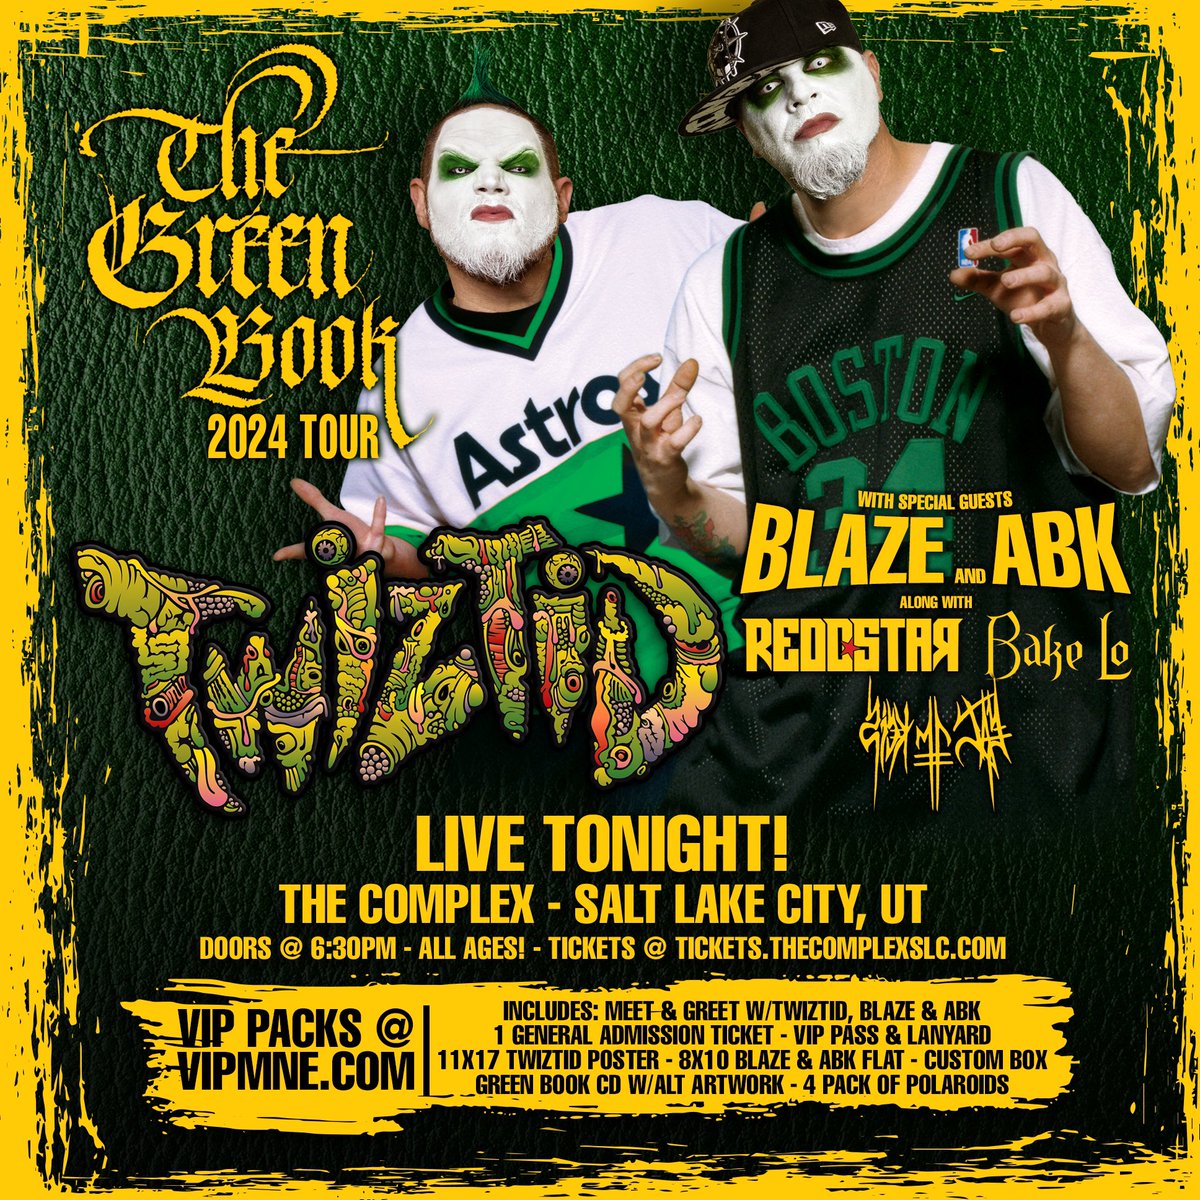 Salt Lake City it’s your turn for The Green Book 📗 Don’t miss @tweetmesohard , @blazeyadead1 , @abkwarrior and Bake Lo LIVE TONIGHT‼️ See you at The Complex 🤘 Details ➡️ vipmne.com